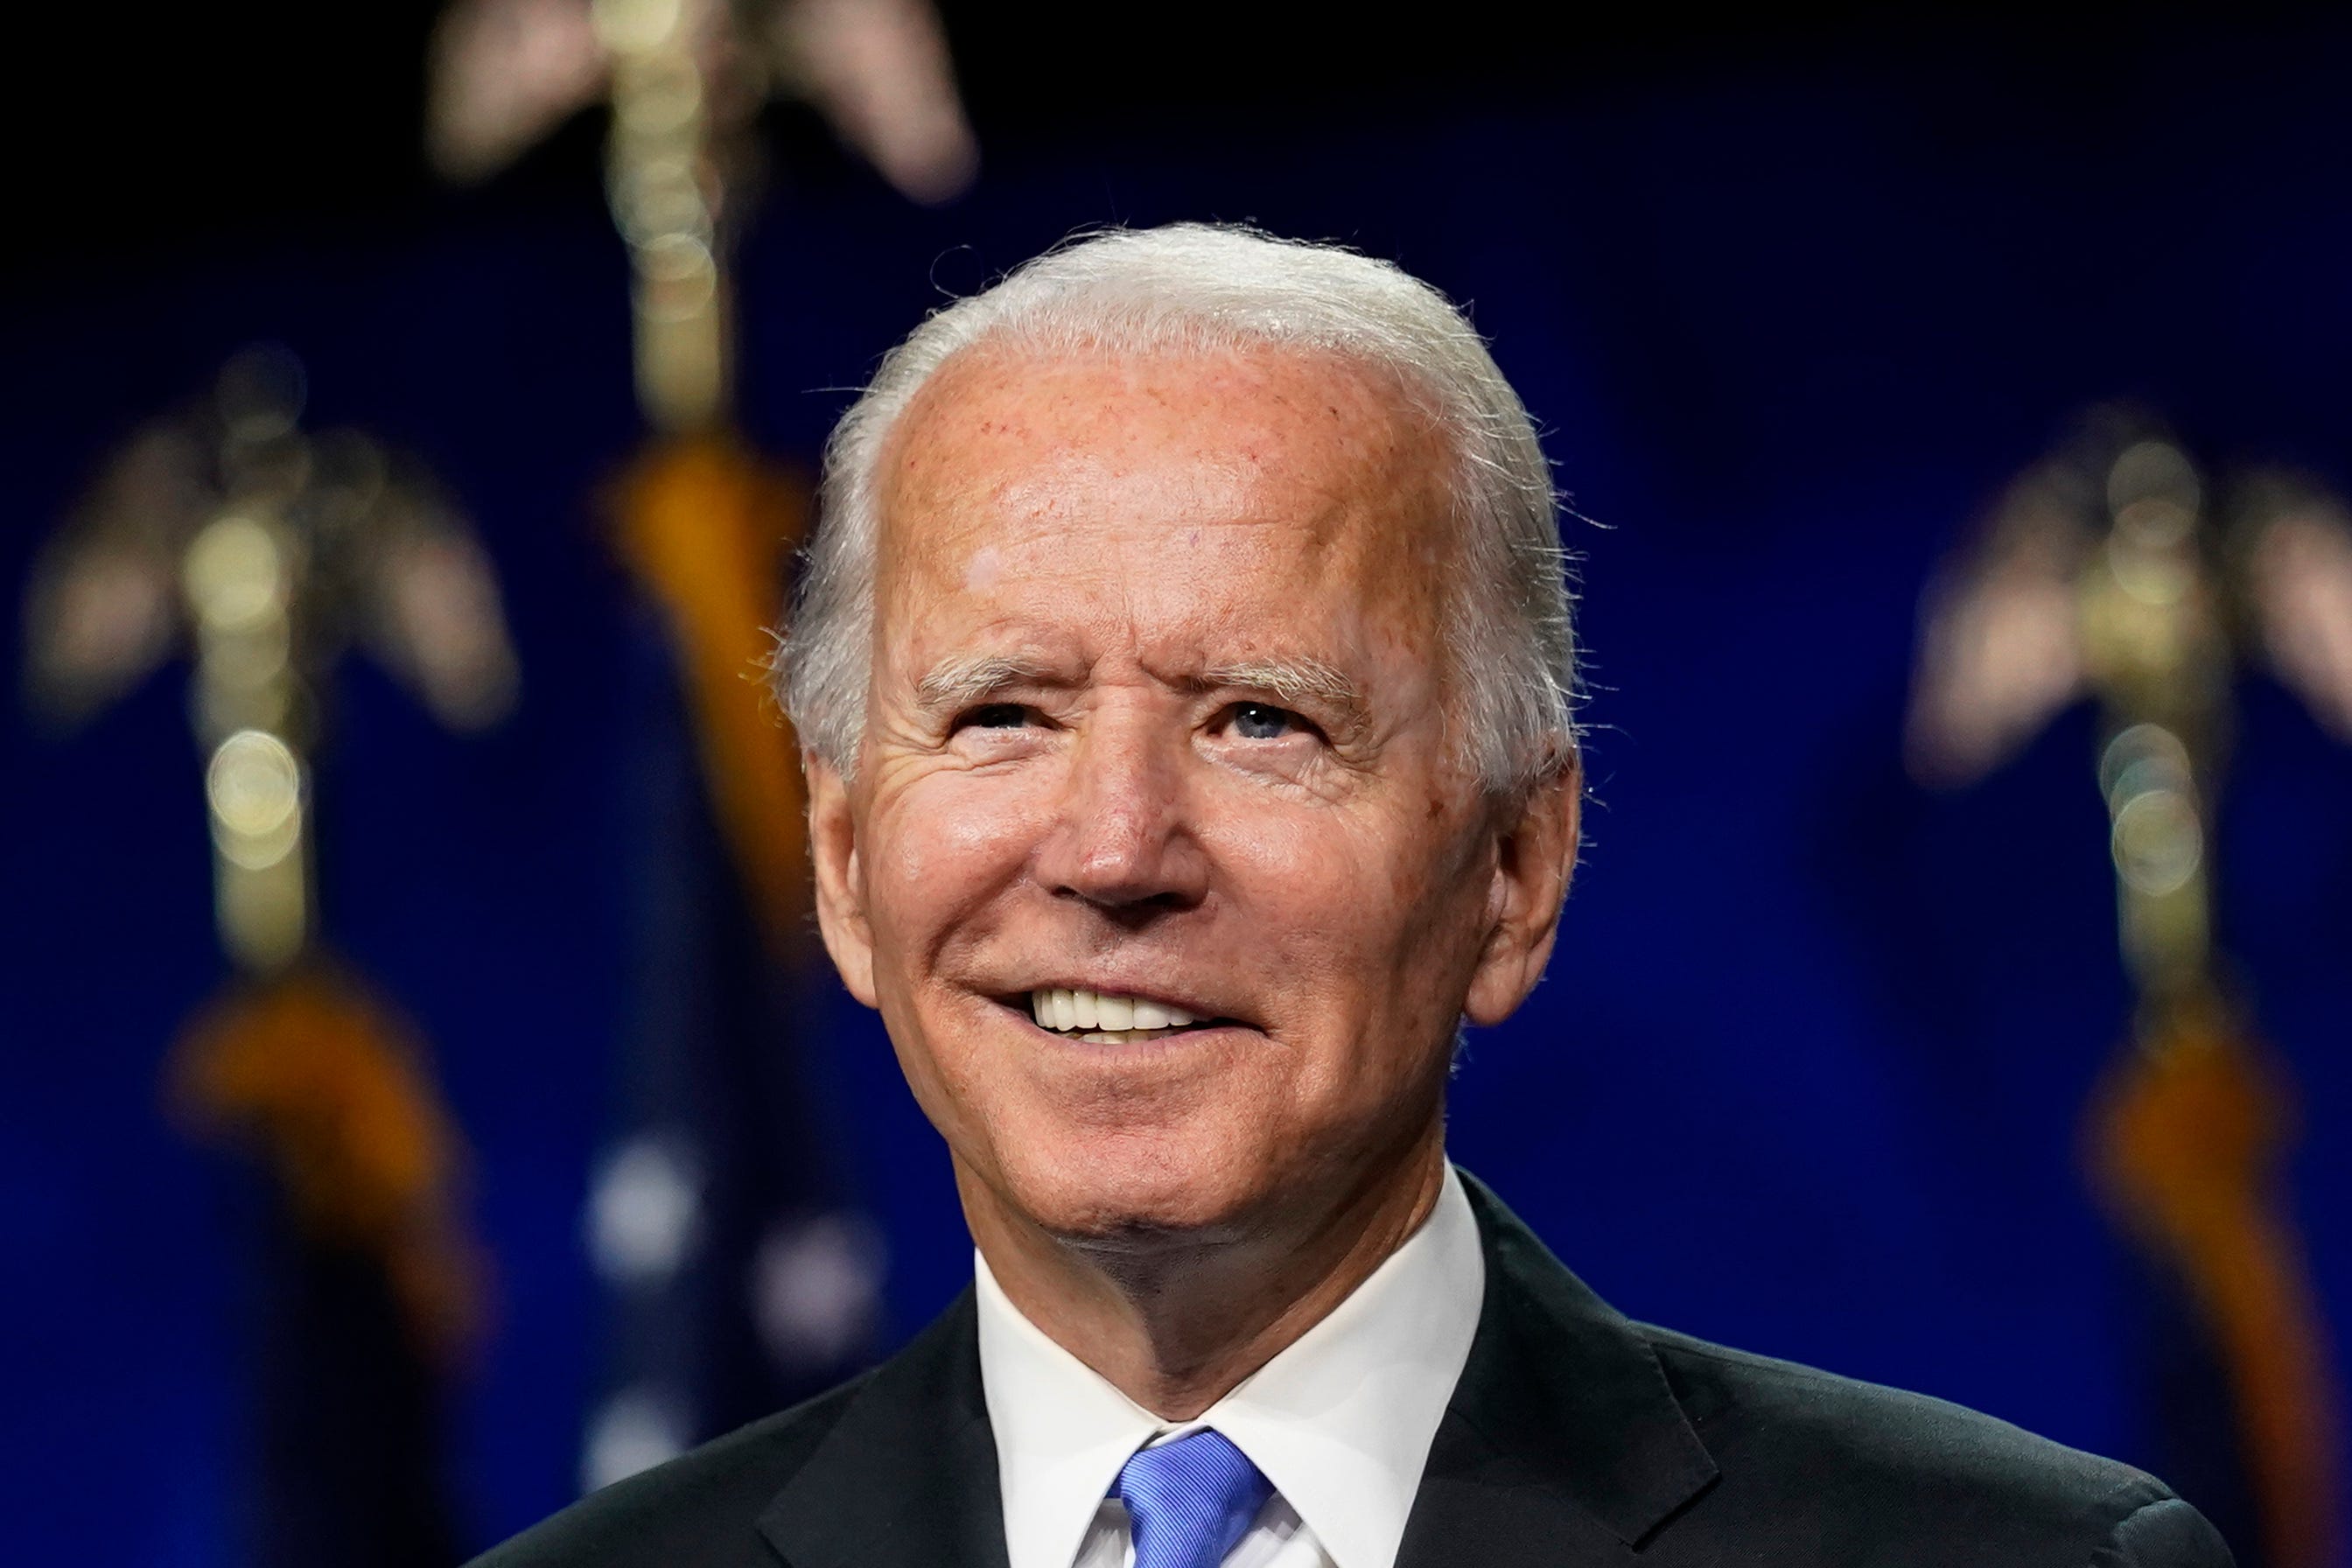 joe biden cant beat bernie - Biden|President|Joe|States|Delaware|Obama|Vice|Senate|Campaign|Election|Time|Administration|House|Law|People|Years|Family|Year|Trump|School|University|Senator|Office|Party|Country|Committee|Act|War|Days|Climate|Hunter|Health|America|State|Day|Democrats|Americans|Documents|Care|Plan|United States|Vice President|White House|Joe Biden|Biden Administration|Democratic Party|Law School|Presidential Election|President Joe Biden|Executive Orders|Foreign Relations Committee|Presidential Campaign|Second Term|47Th Vice President|Syracuse University|Climate Change|Hillary Clinton|Last Year|Barack Obama|Joseph Robinette Biden|U.S. Senator|Health Care|U.S. Senate|Donald Trump|President Trump|President Biden|Federal Register|Judiciary Committee|Presidential Nomination|Presidential Medal